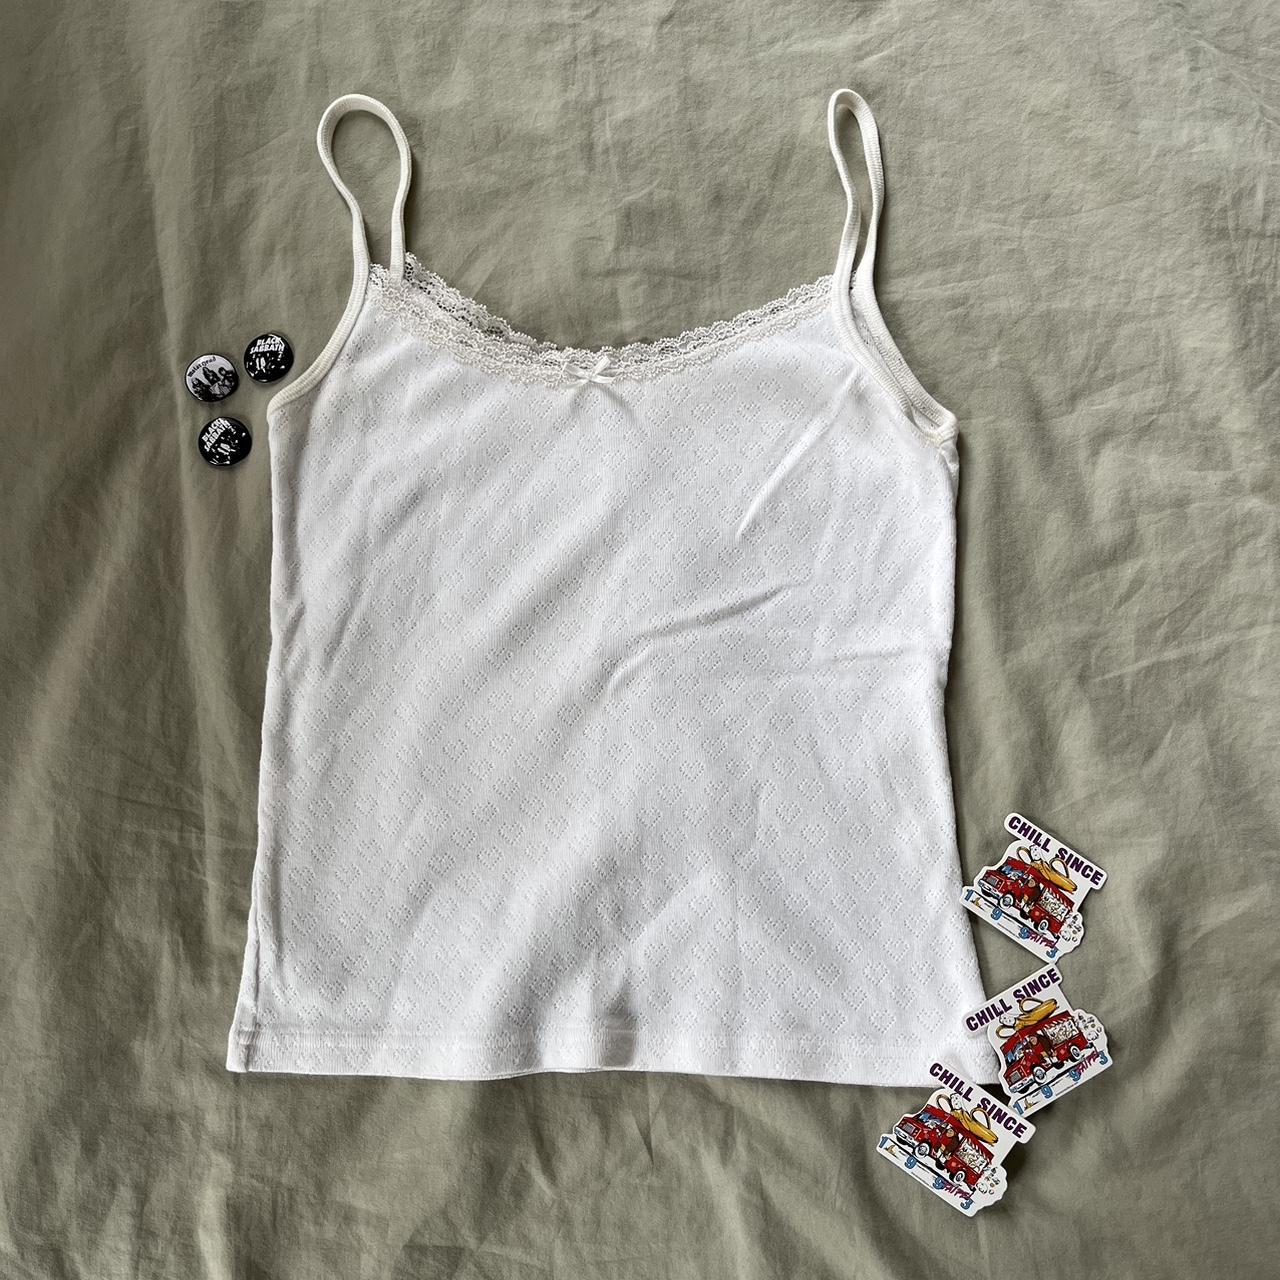 Brandy Melville Heart Tank Top Size undefined - $24 - From Flippin